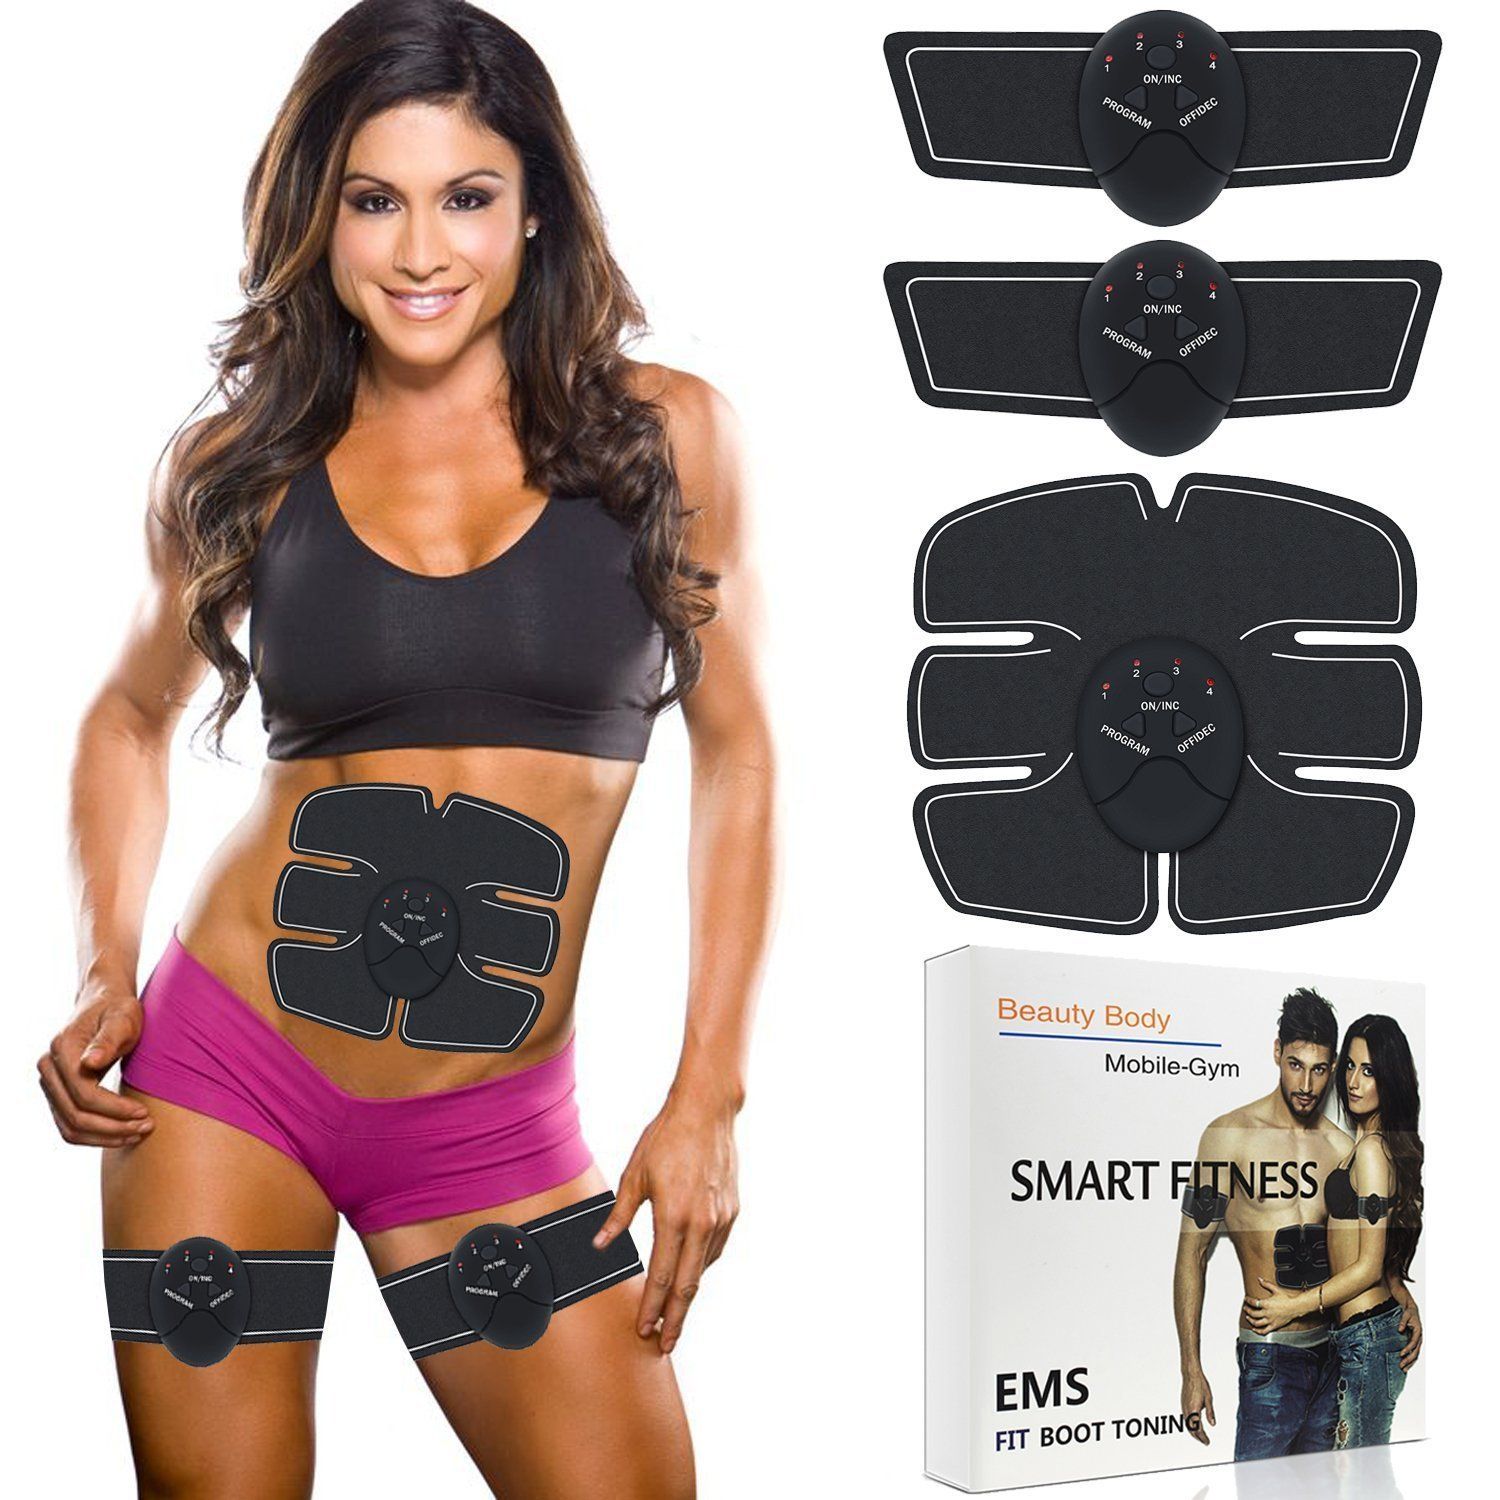 EMS Abdominal Muscle Stimulator Trainer USB Connect Abs Fitness Equipment askddeal.com